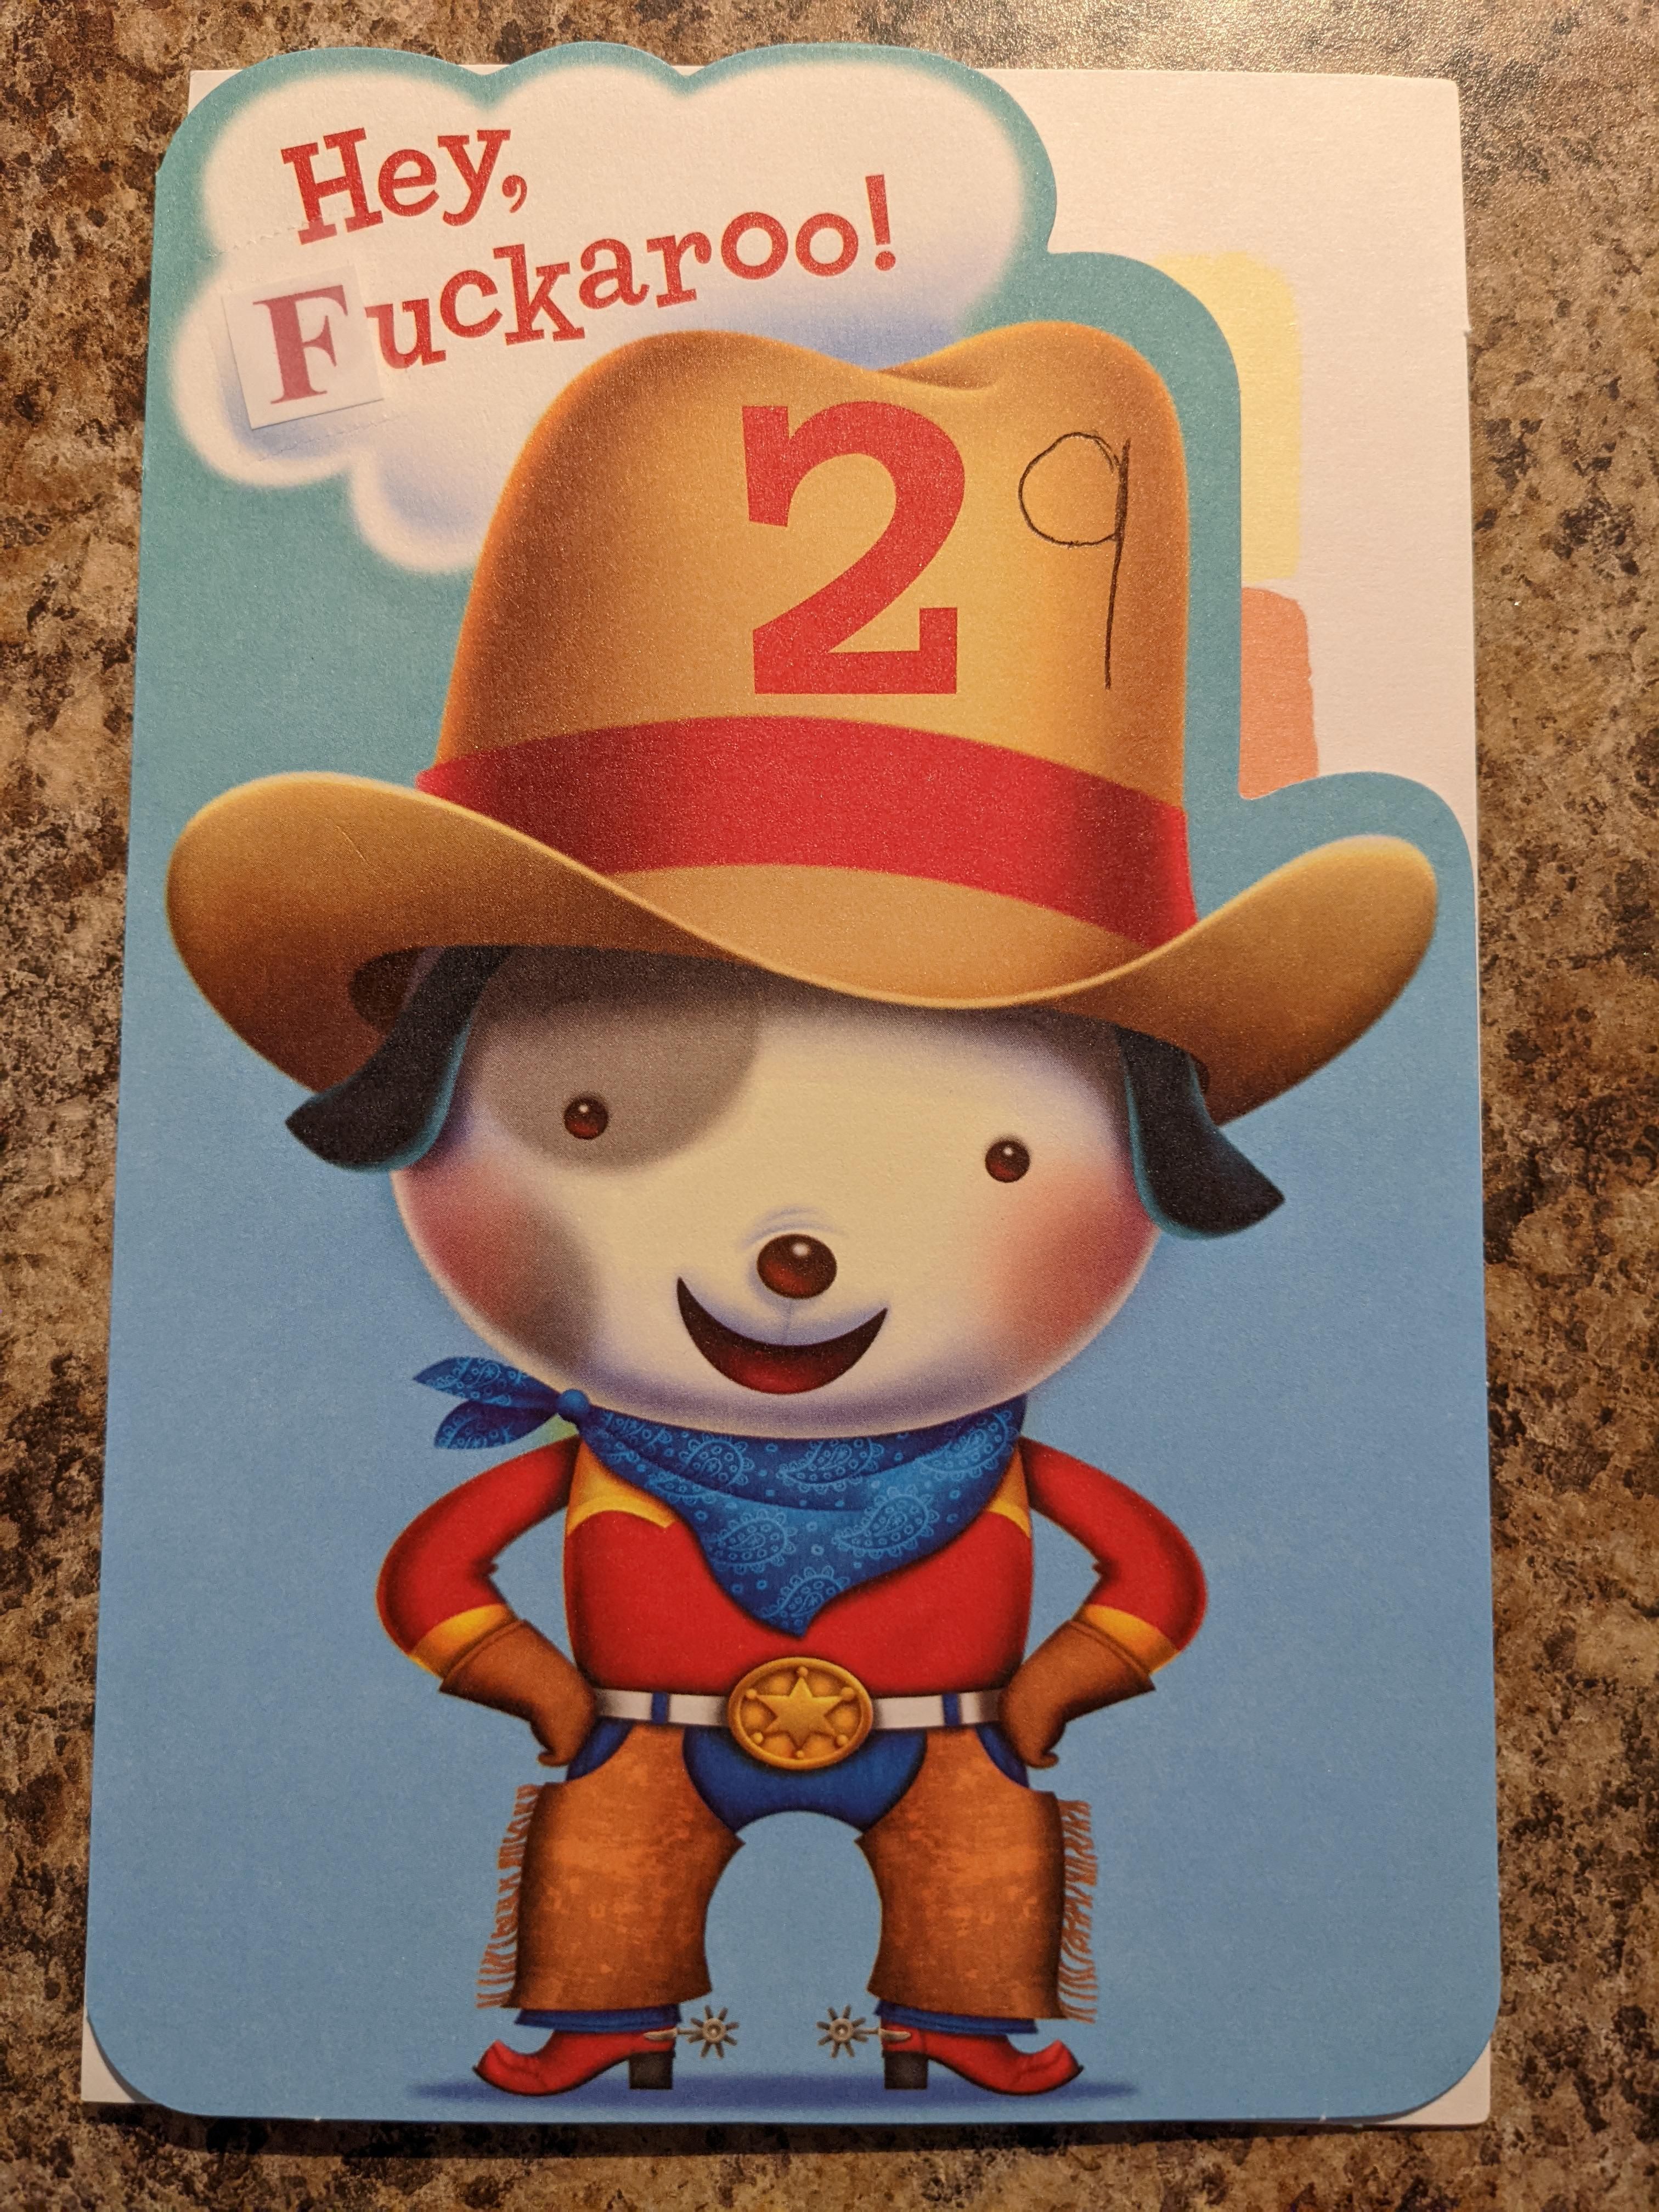 My brother gives me a modified kids card for my birthday every year